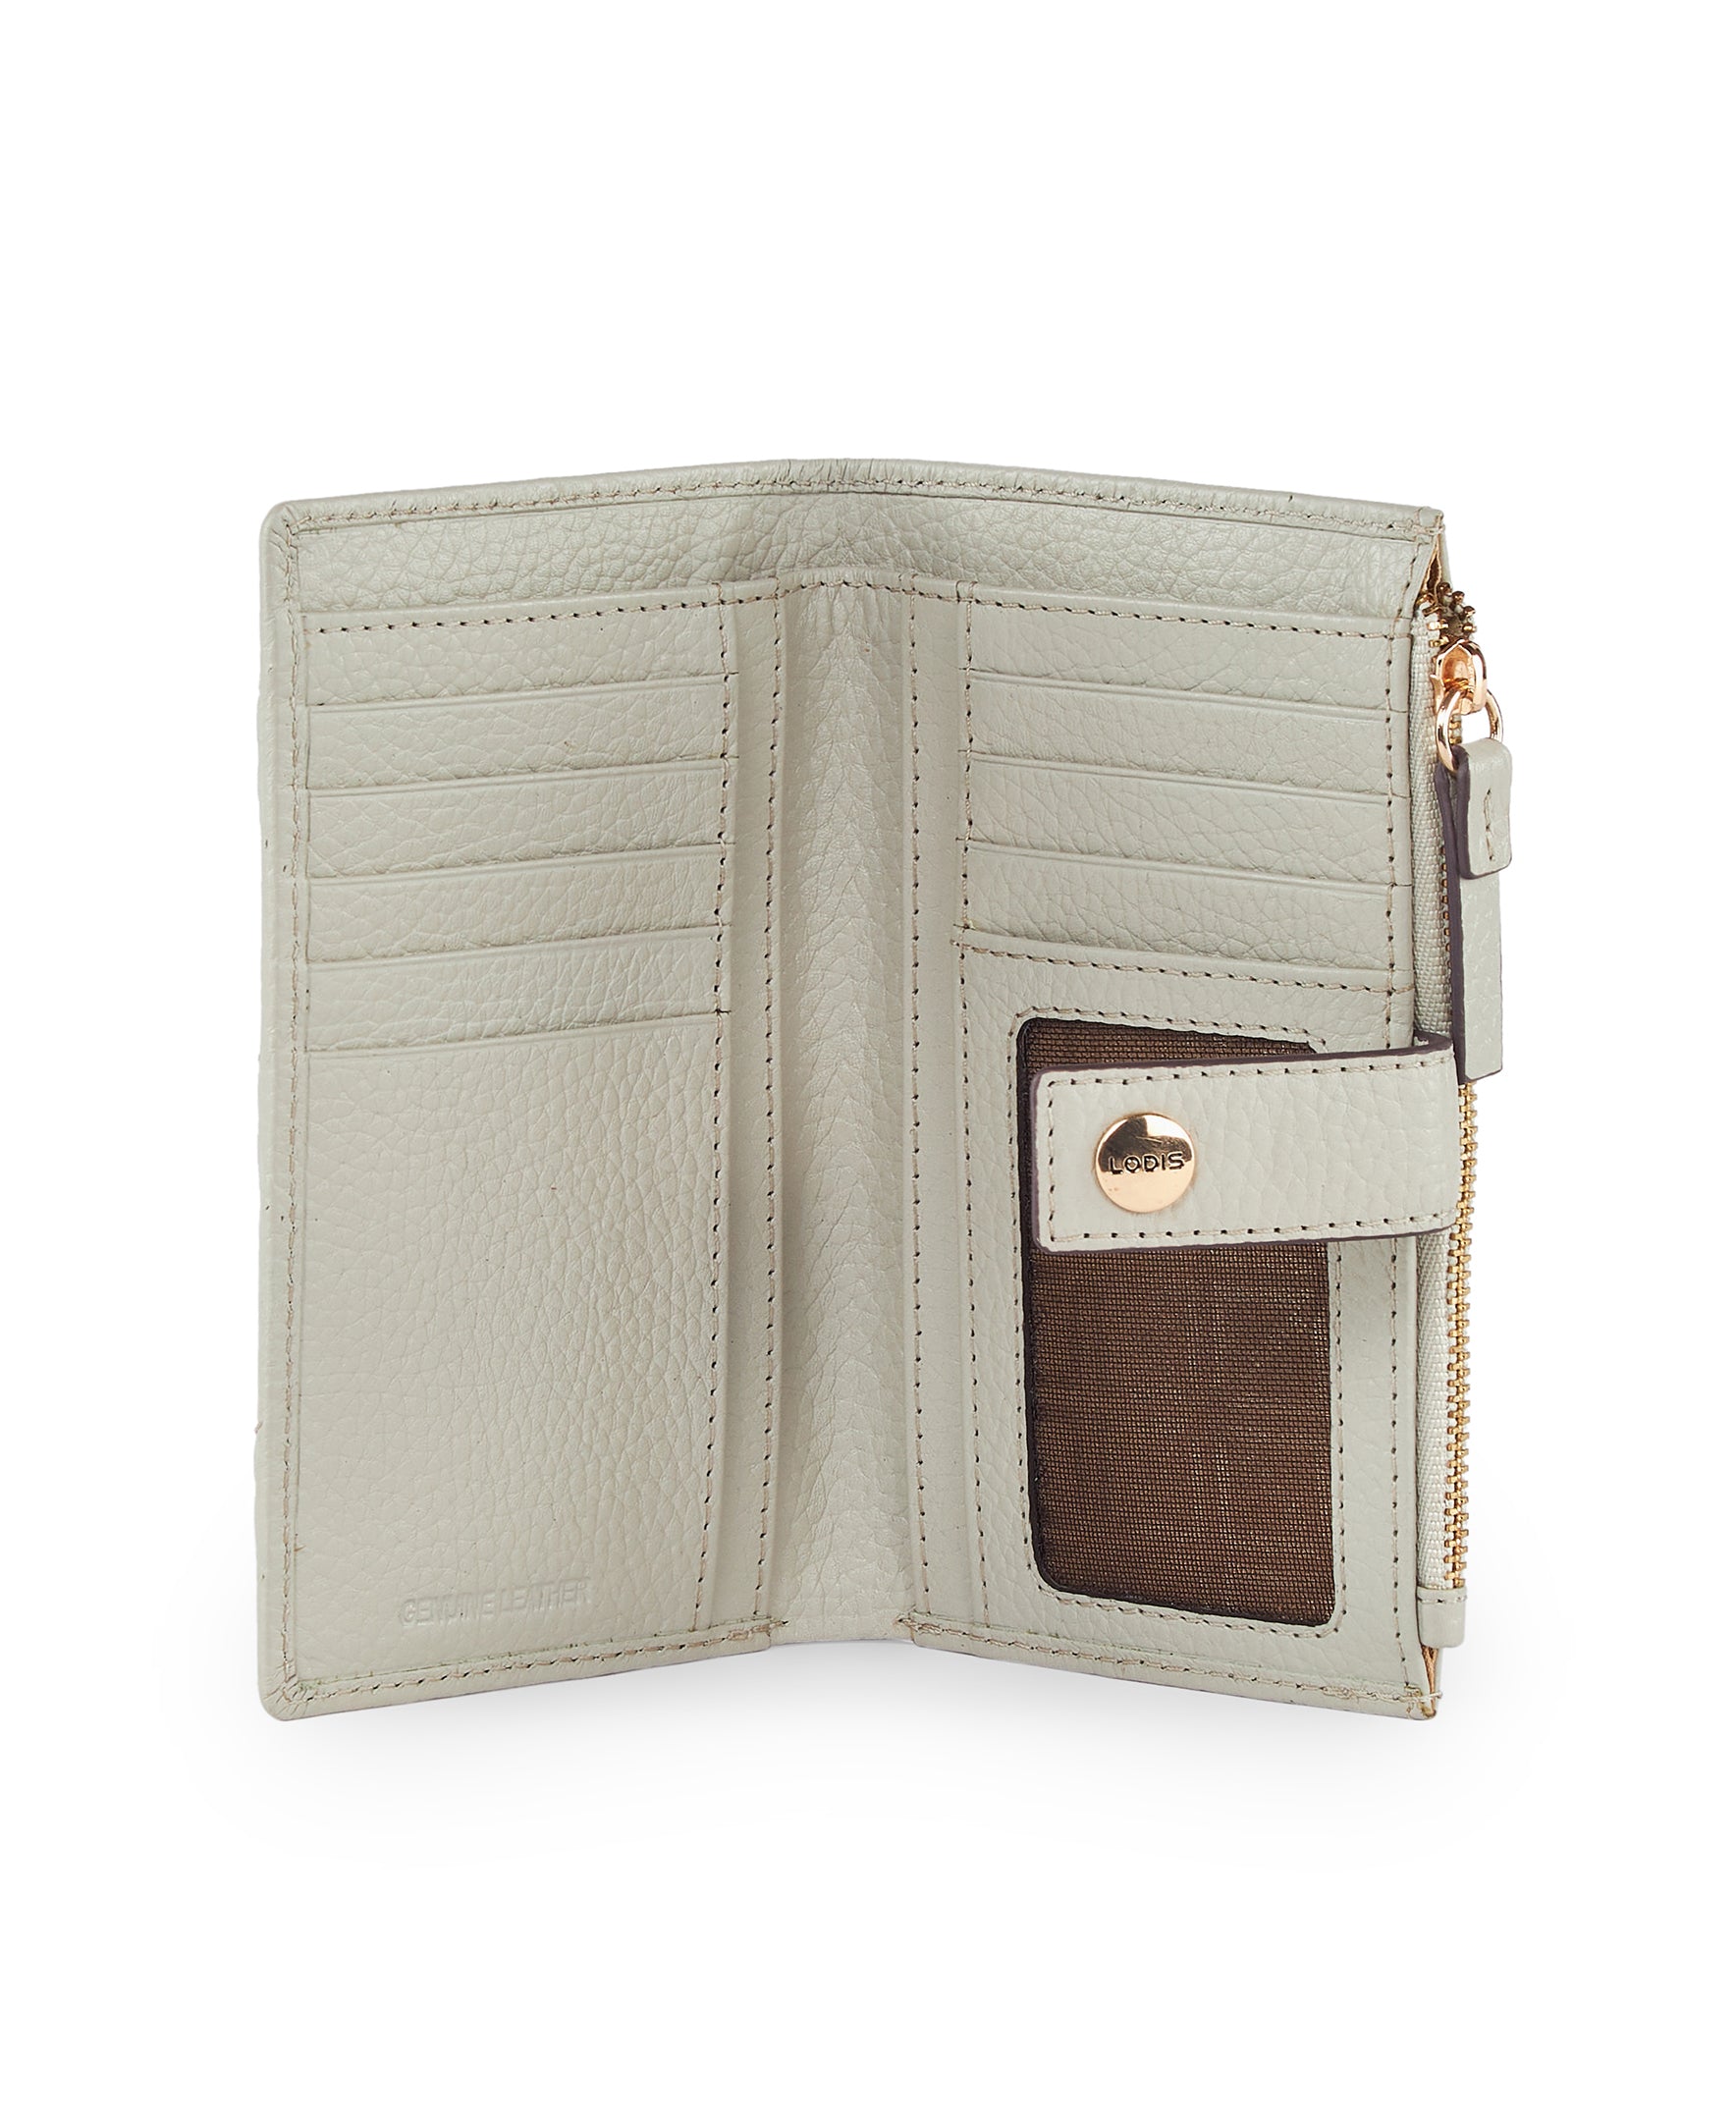 Spencer Small Compact Wallet